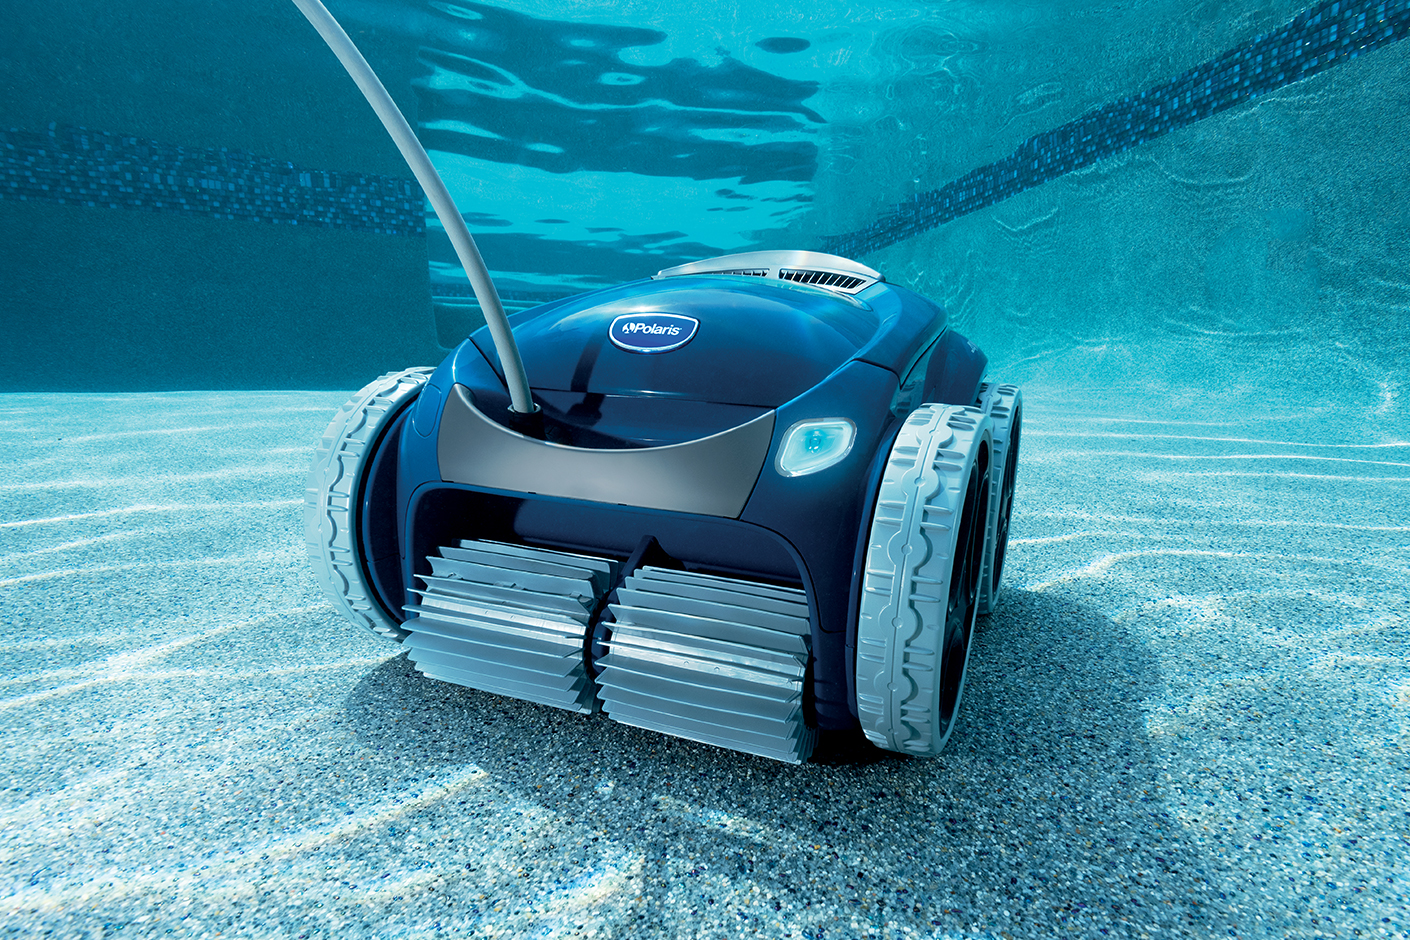 Robotic Pool Cleaner with Energy Efficient Power Source, robotic pool cleaners, pool robotic cleaners